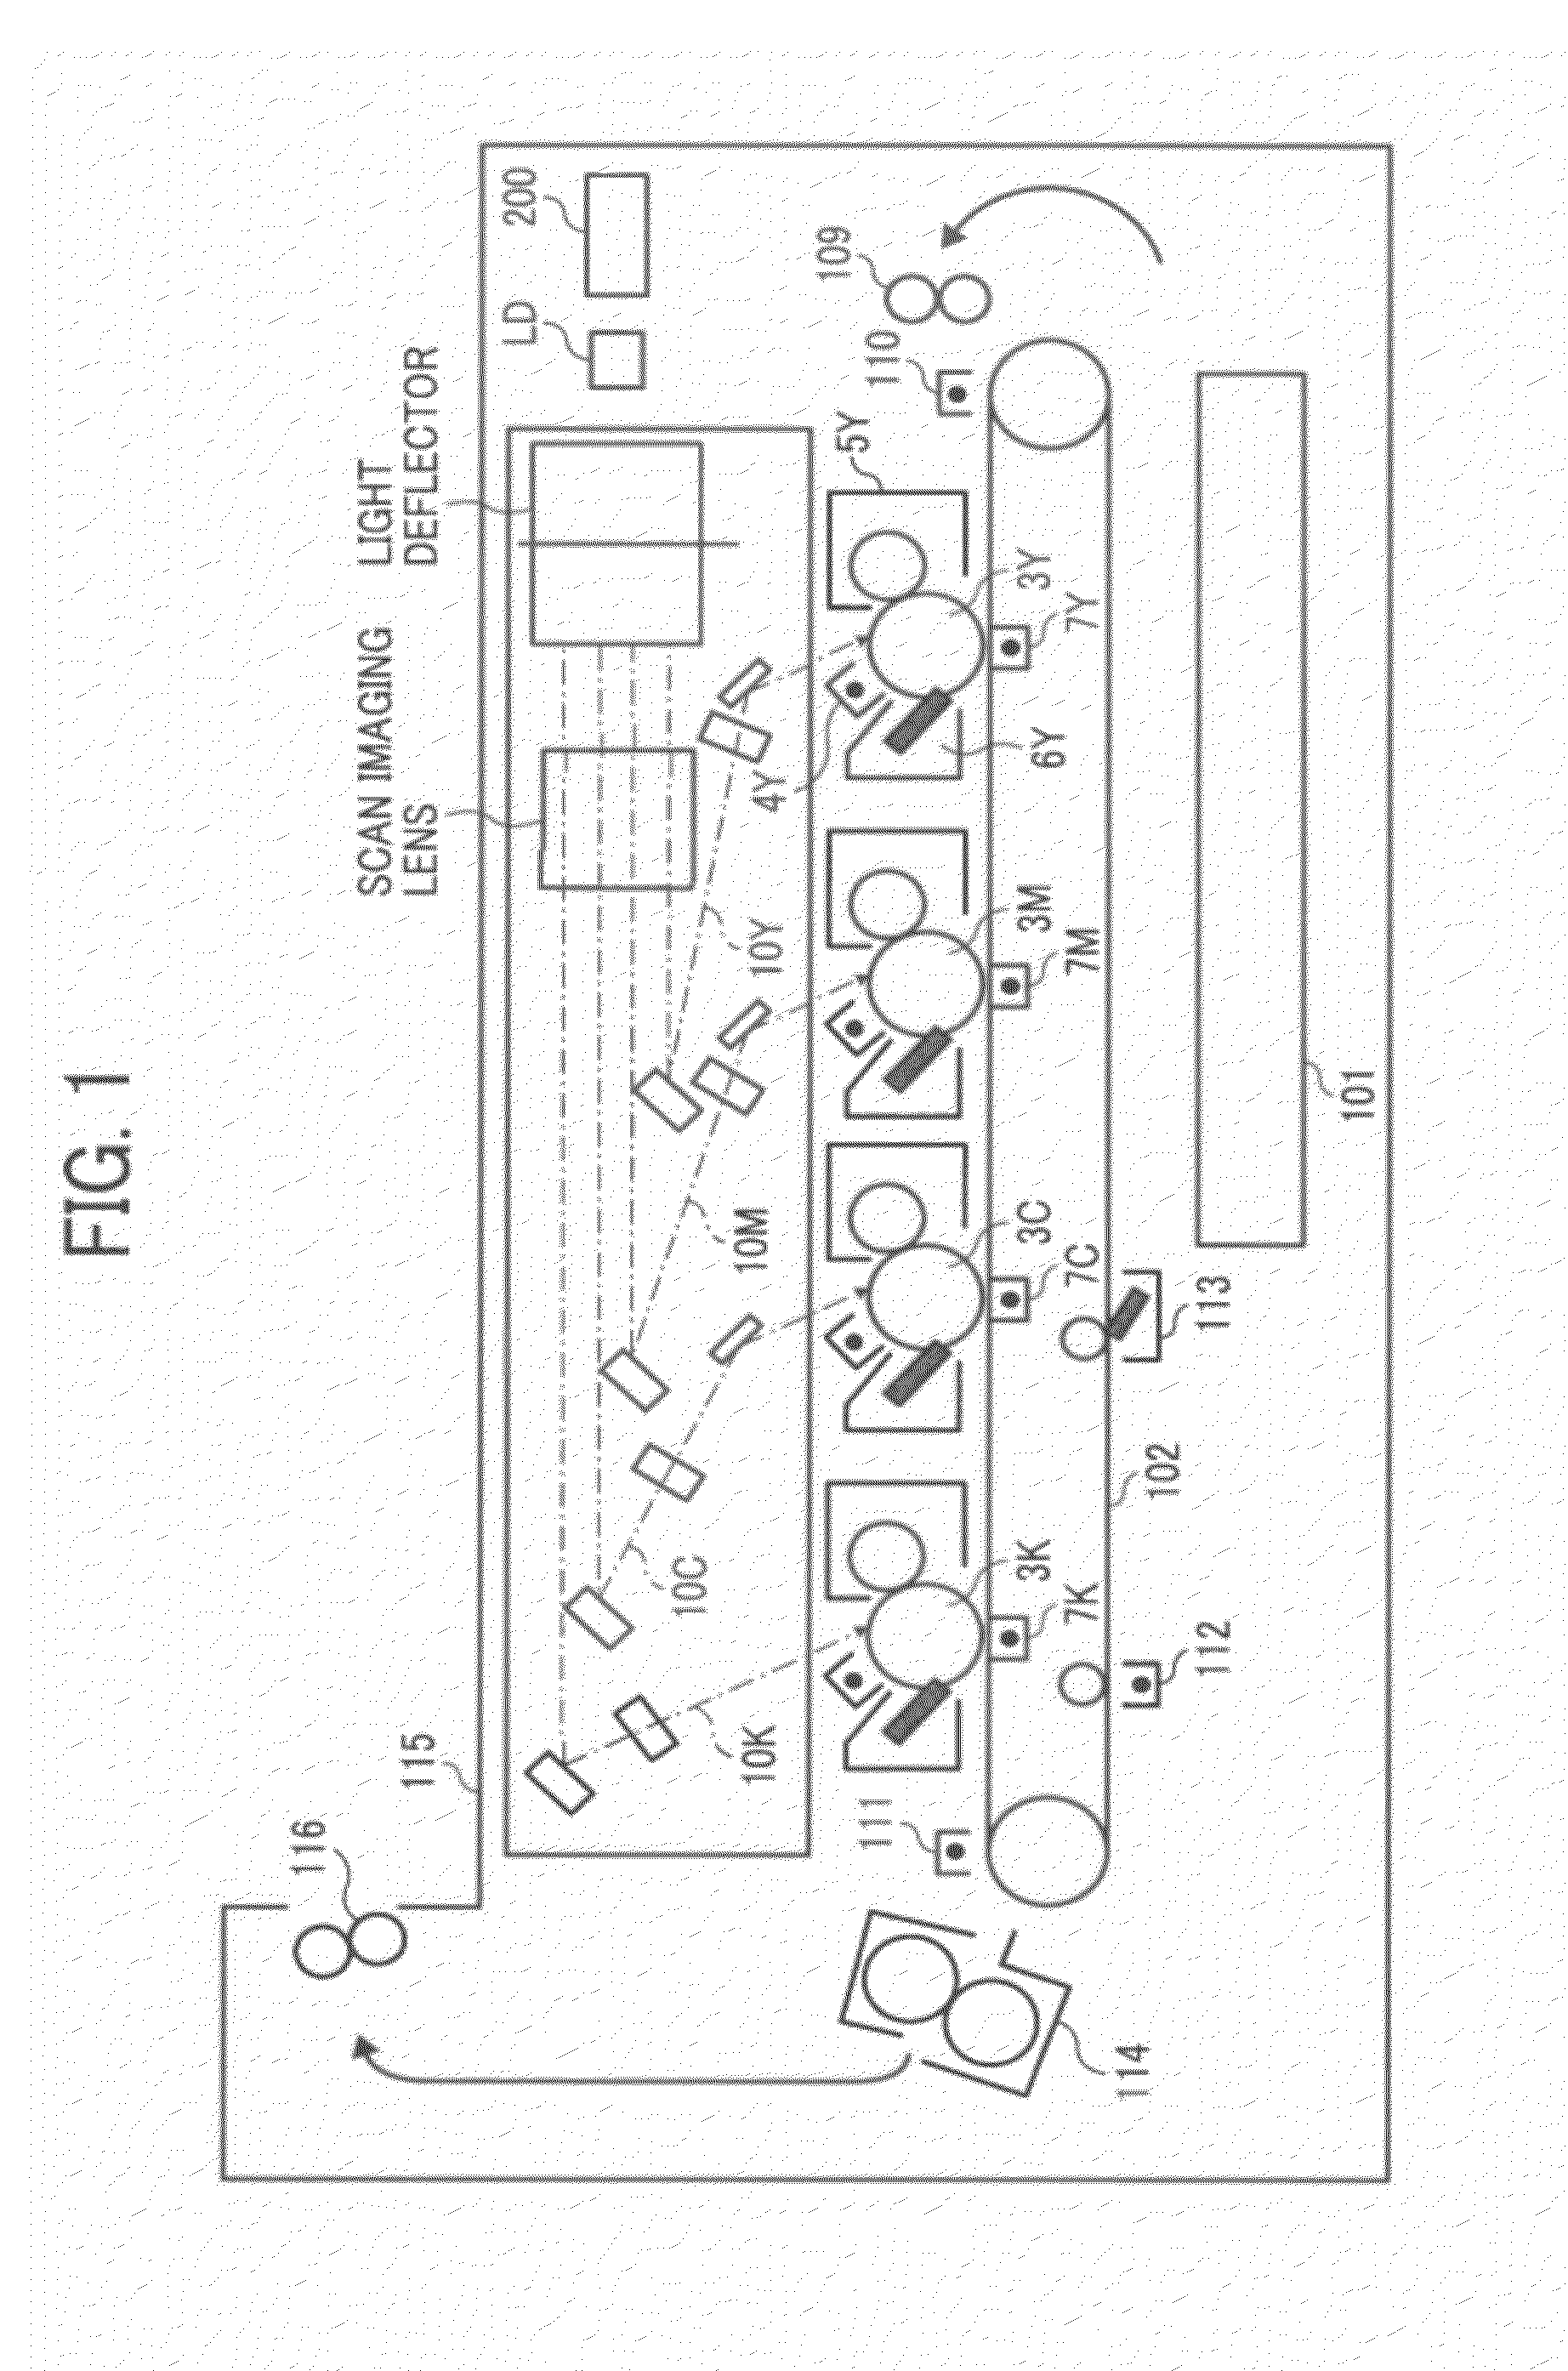 Image processing apparatus, control method, and computer program product capable of minimizing cross-linkage between line screens